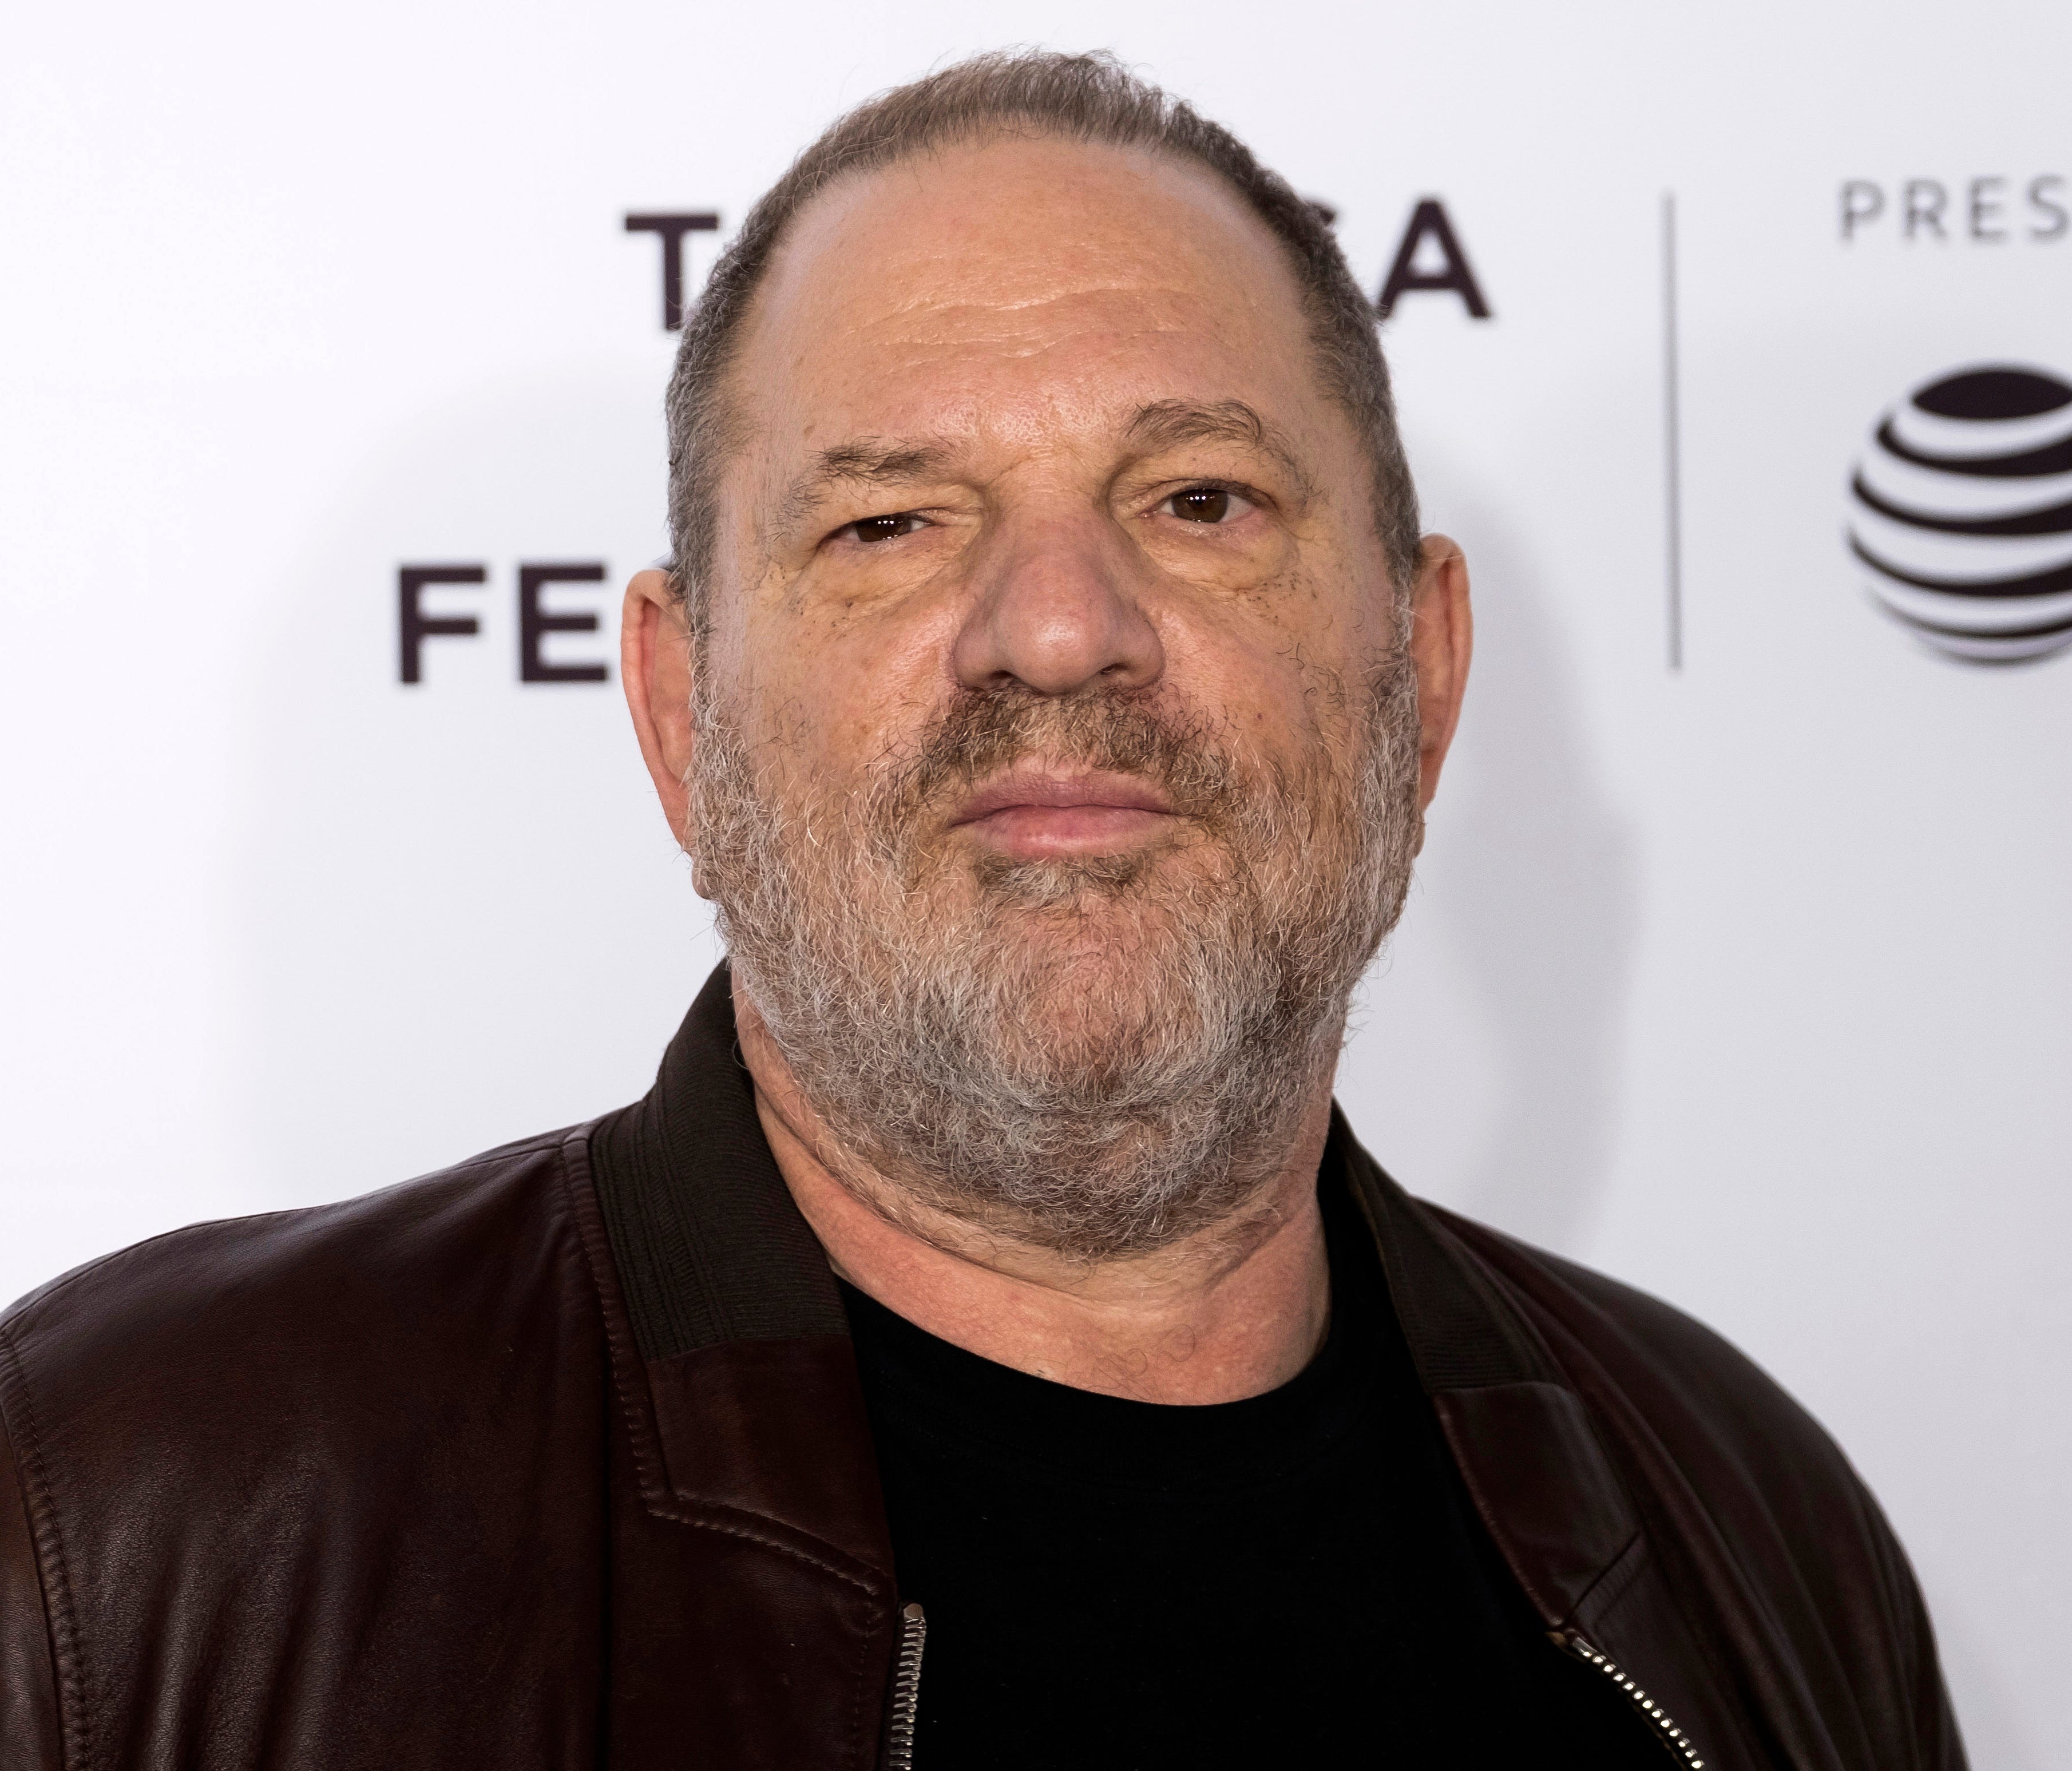 A civil claim has been filed against Harvey Weinstein in the UK.